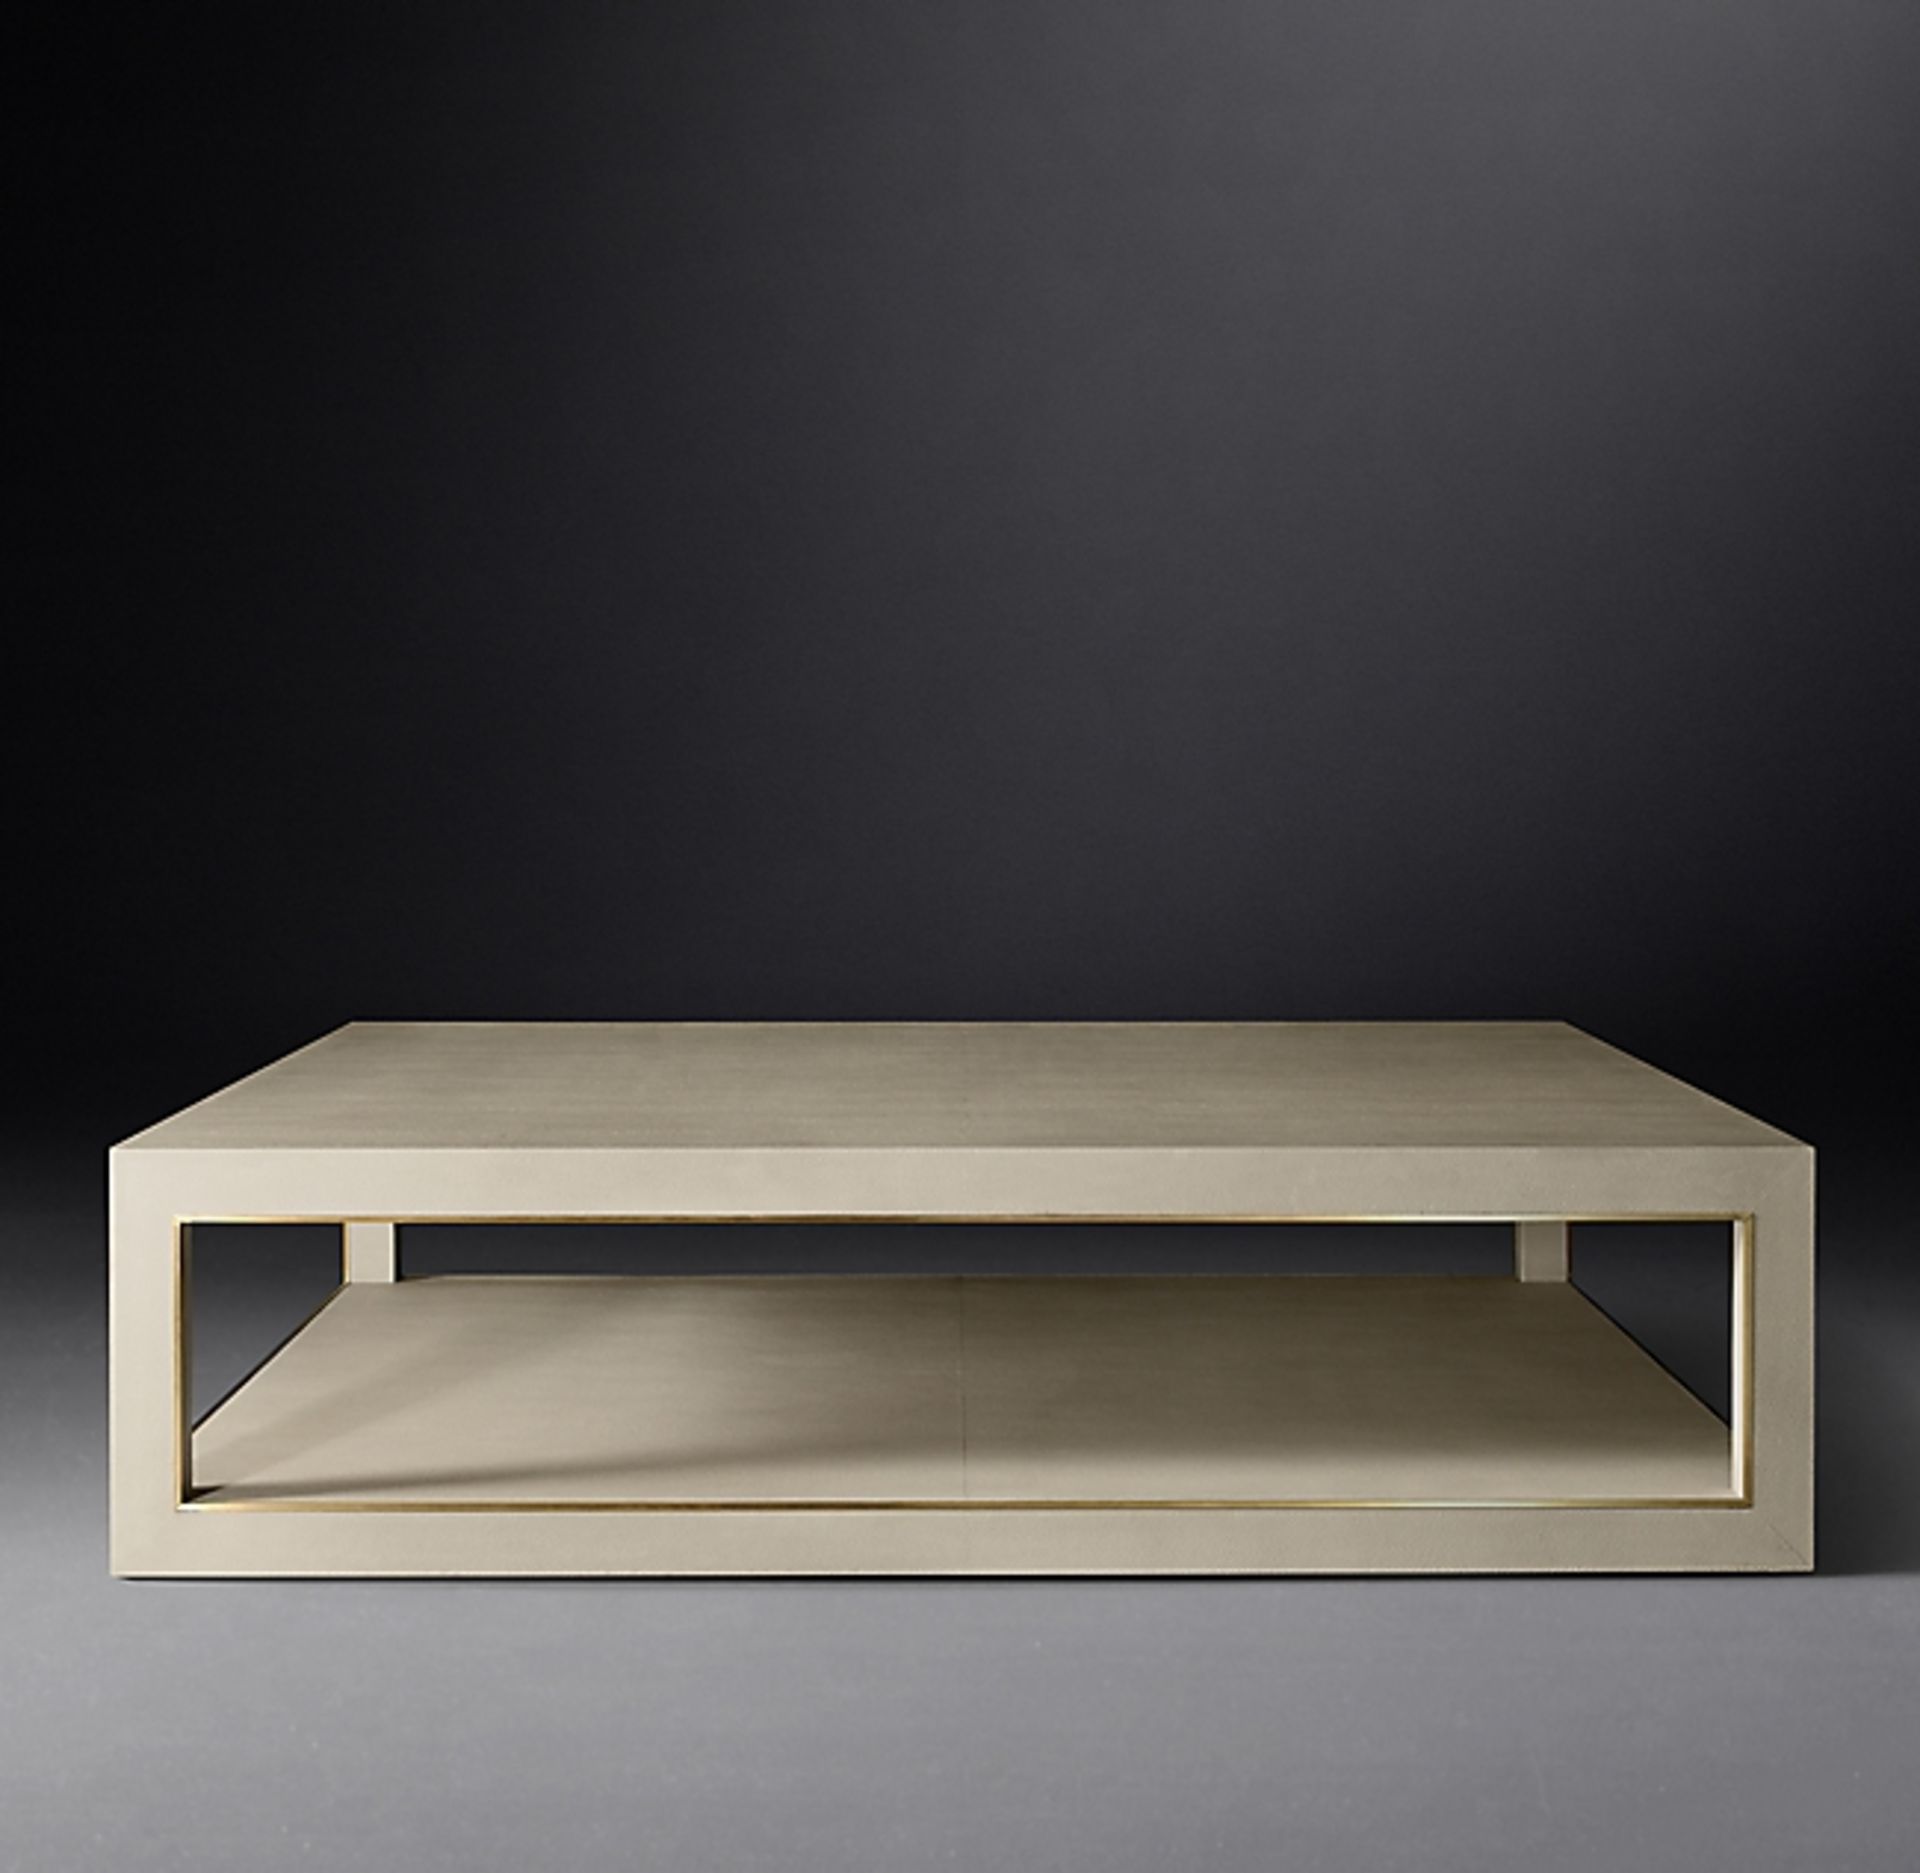 Cela White Shagreen Rectangular Coffee Table Crafted Of Shagreen-Embossed Leather With The Texture